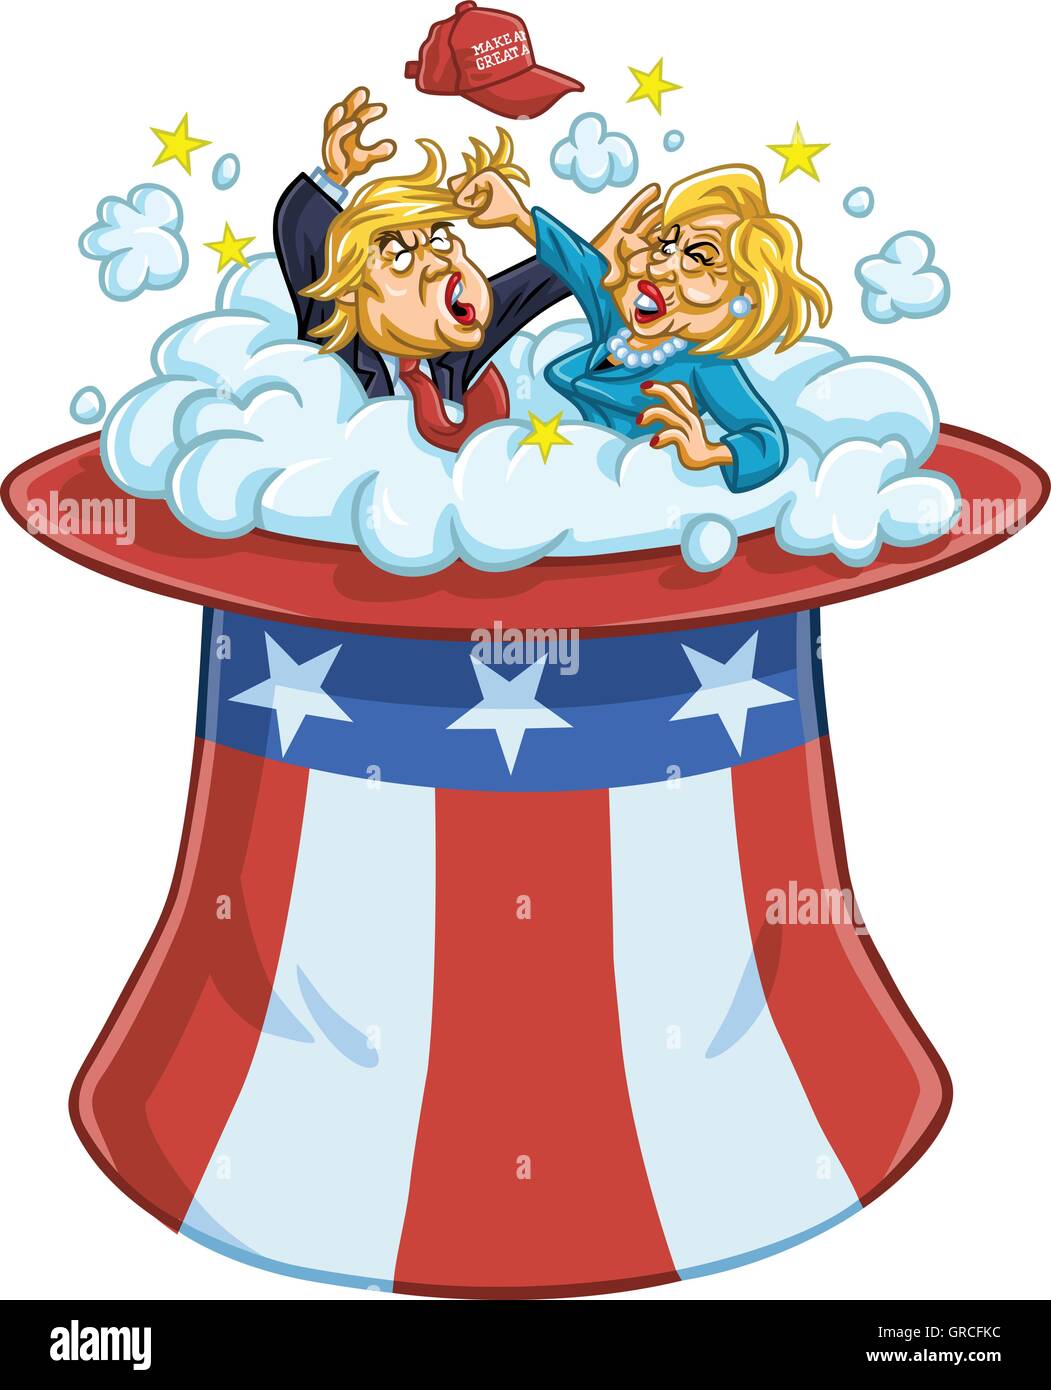 Donald Trump Fighting Against Hillary Clinton On Uncle Sam's Hat Stock Vector